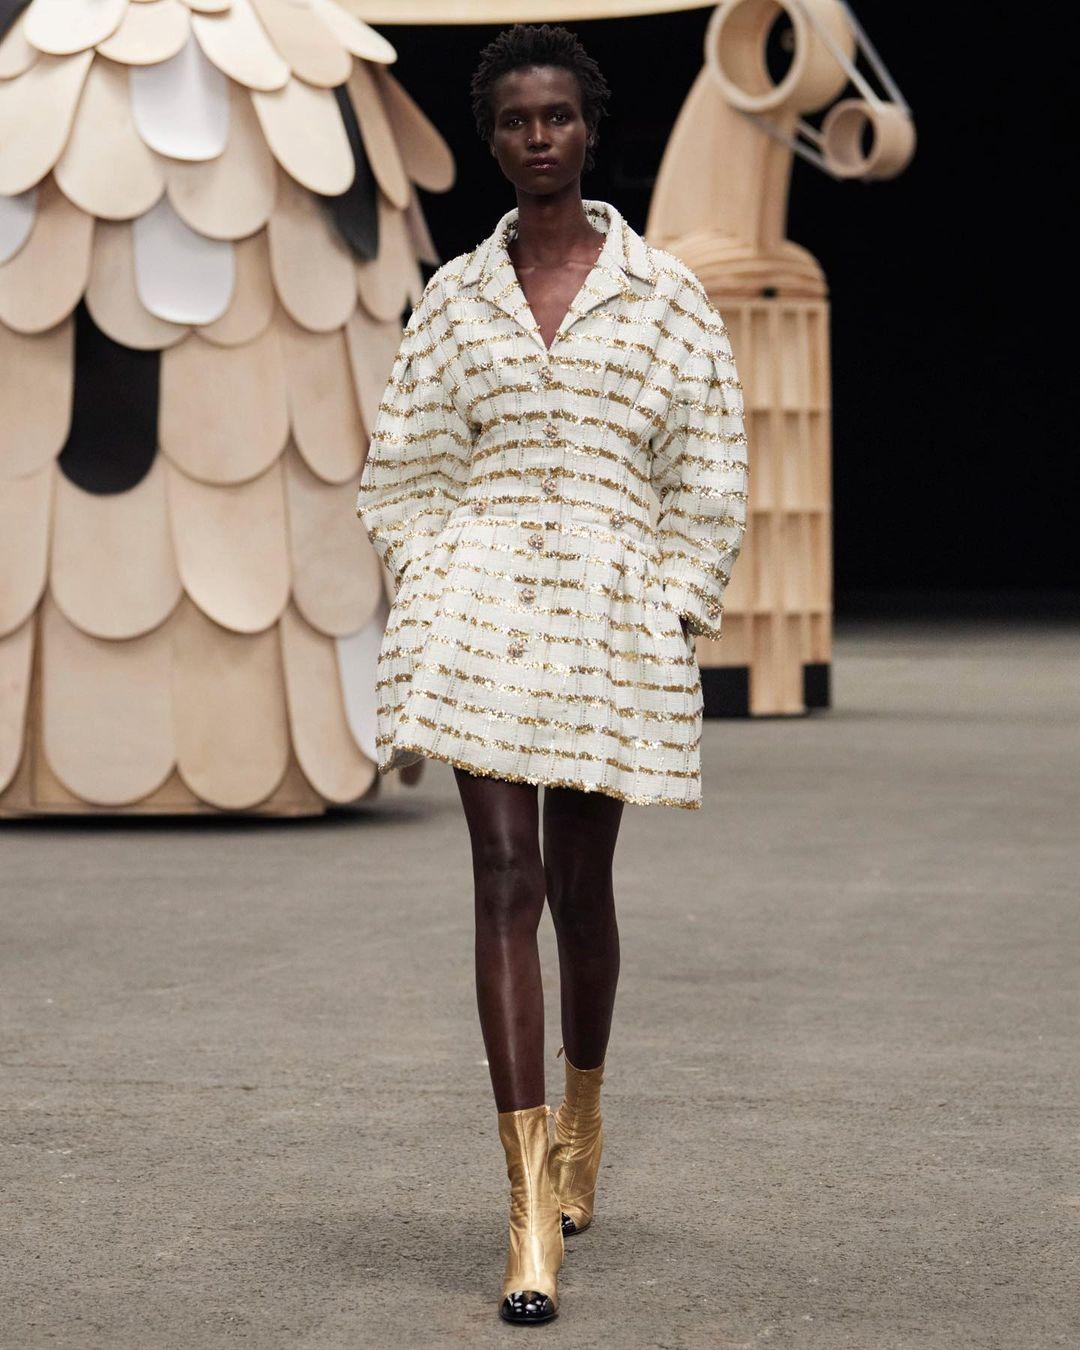 class="content__text"
 Make way for Chanel 🕊

Introducing @chanelofficial’s Spring-Summer 2023 Haute Couture Collection, a reinterpretation of Gabrielle Chanel’s apartment, where Virginie Viard took Xavier Veilhan at the very beginning of their work.

 #chanel 
 